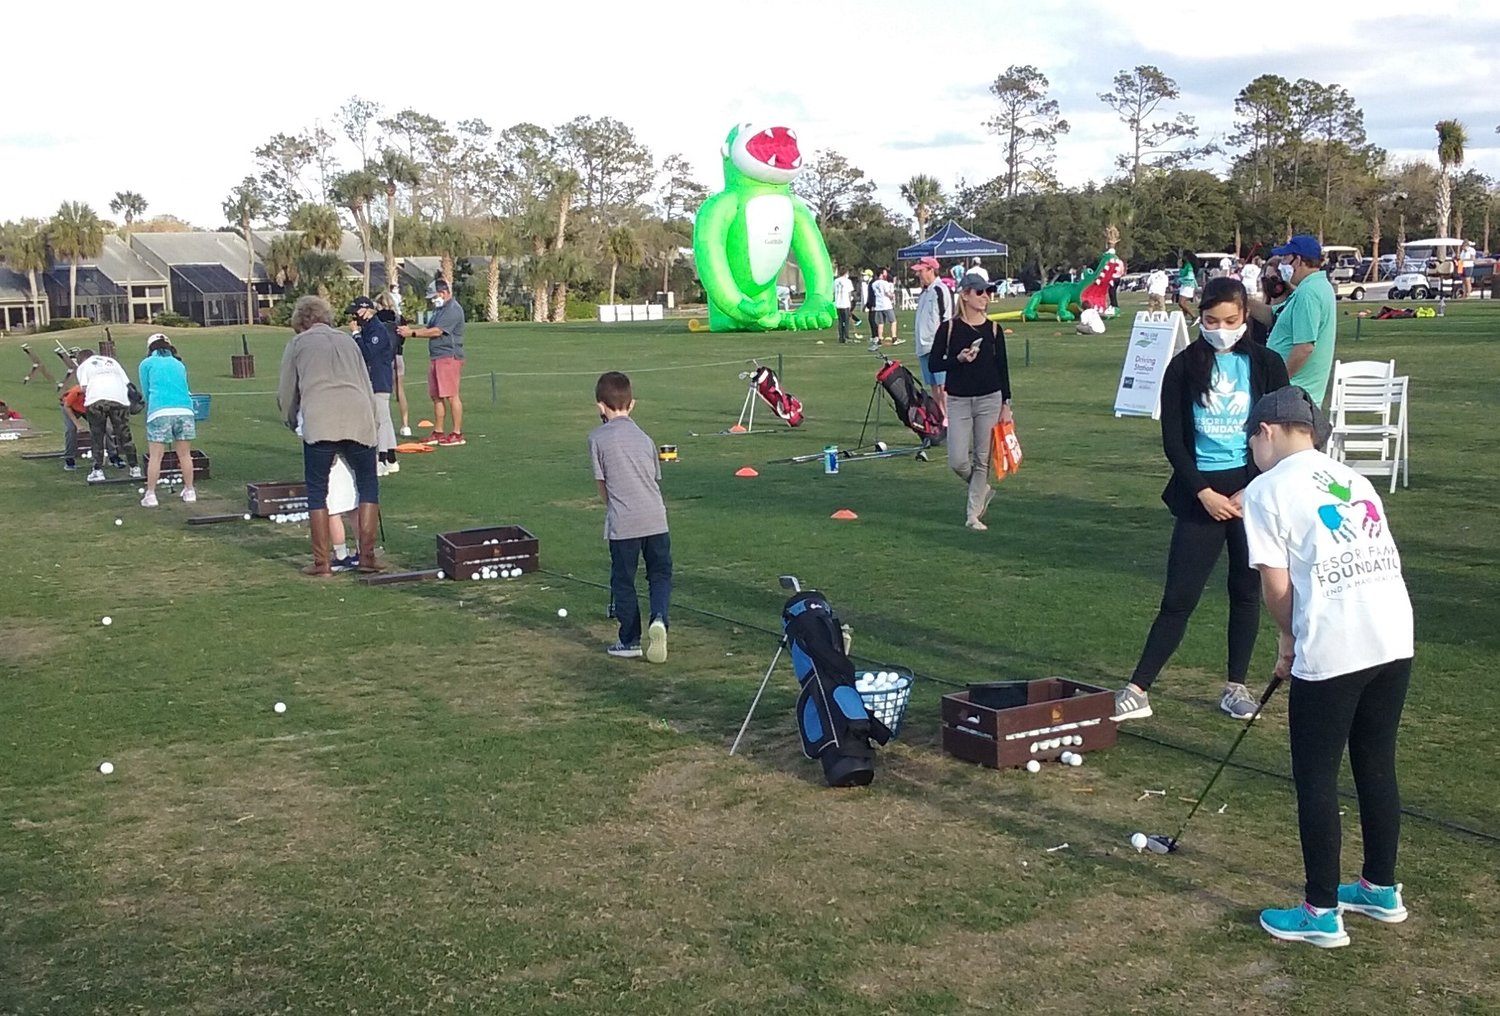 Young golfers line up along the driving range during the Tesori Family Foundation All-Star Kids Clinic on March 10.